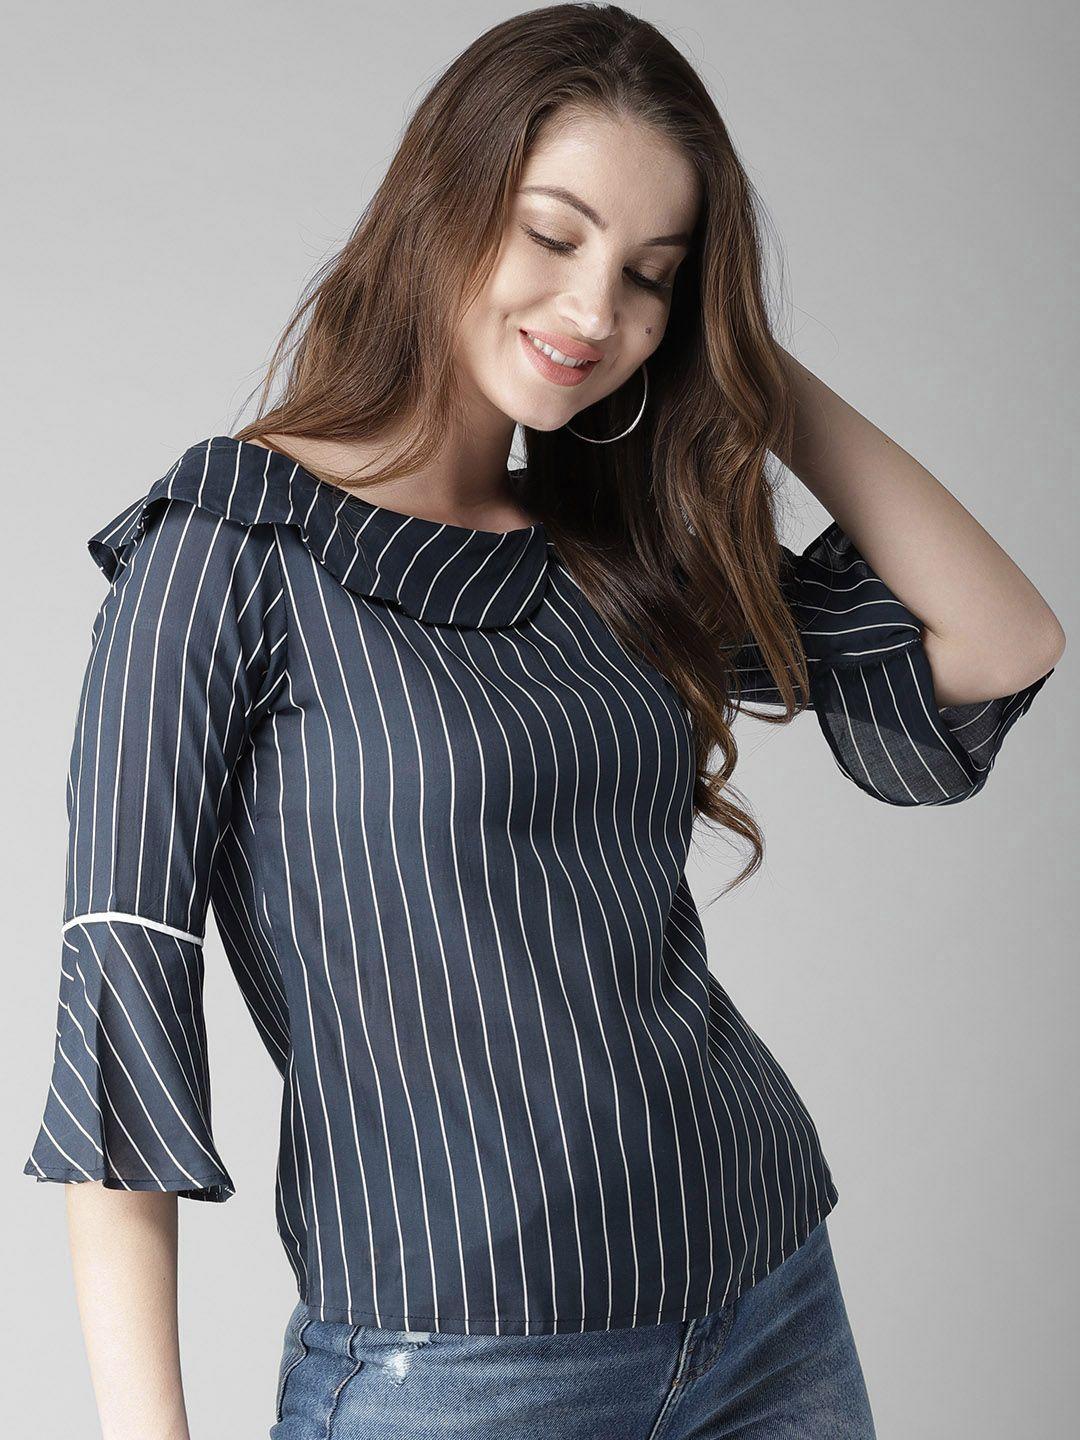 style quotient by noi women navy blue & white striped top